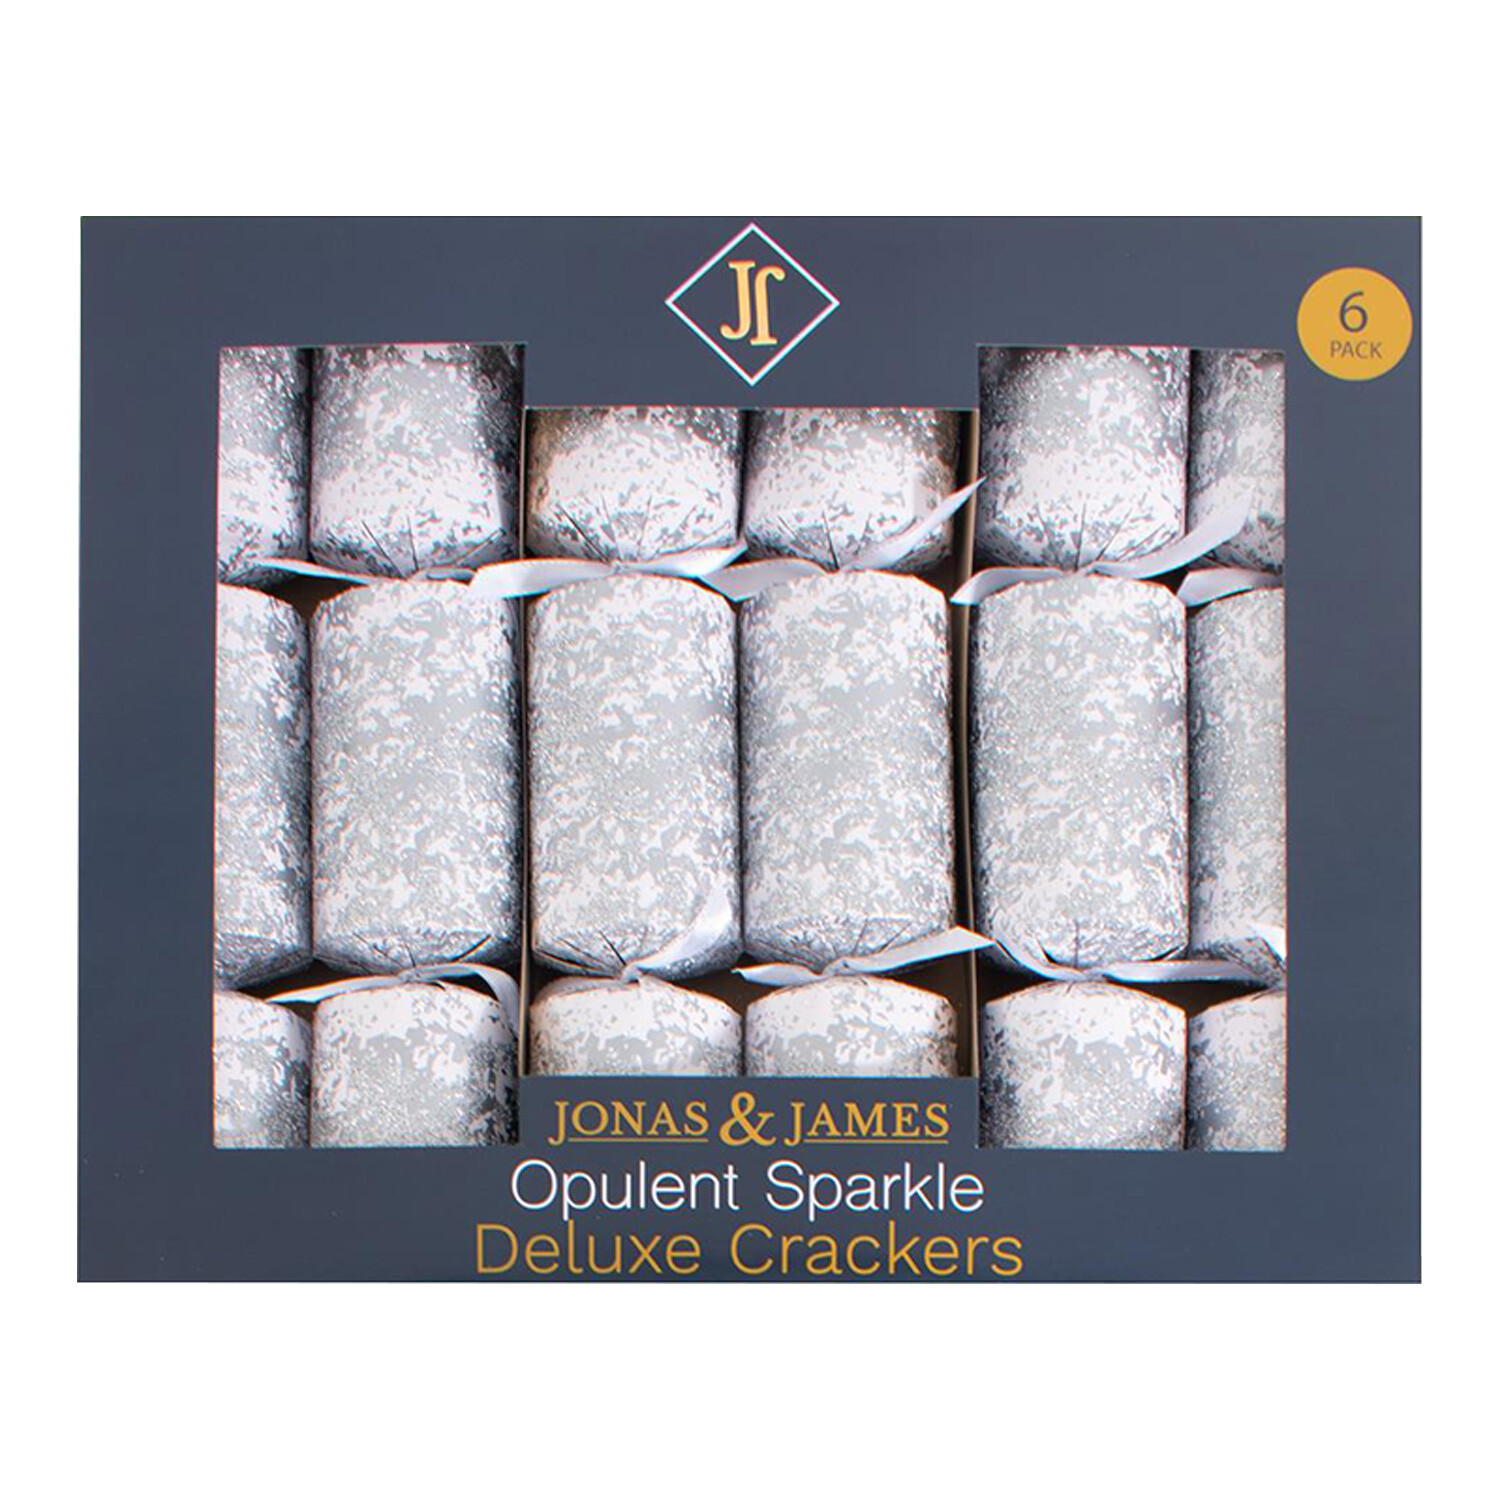 Pack of 6 Deluxe Opulent Sparkle Crackers - Silver Image 1